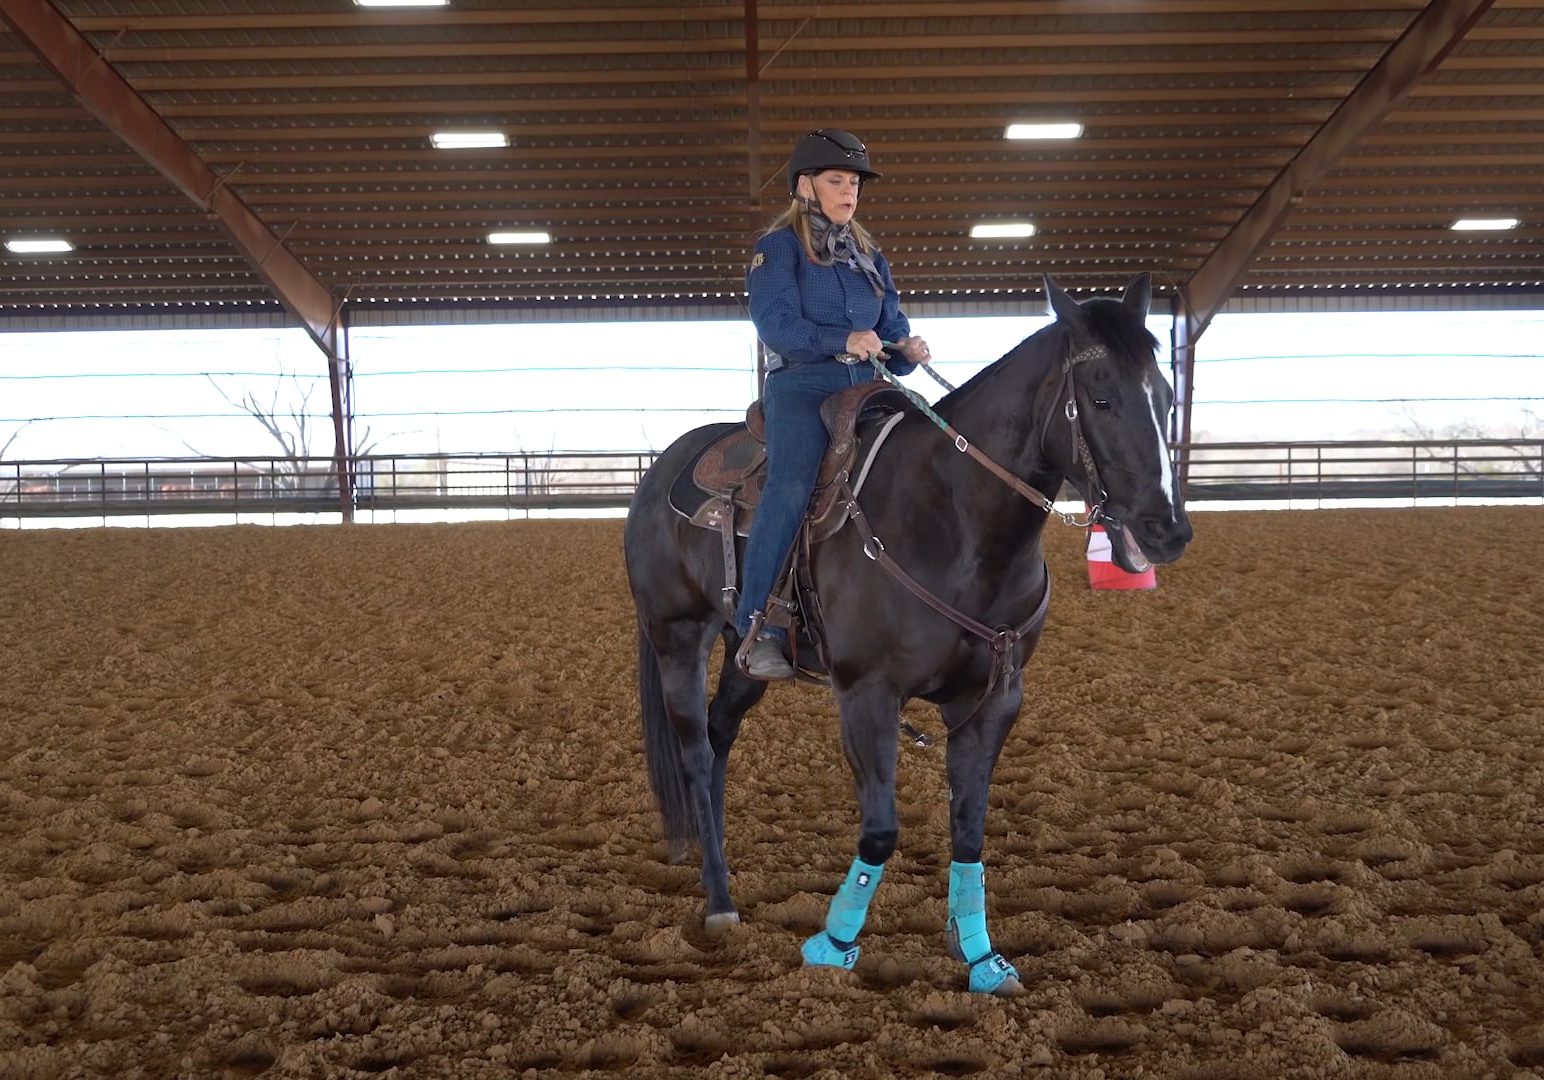 Inside the enclosed field, a woman is wearing a blue suit and riding atop a horse.